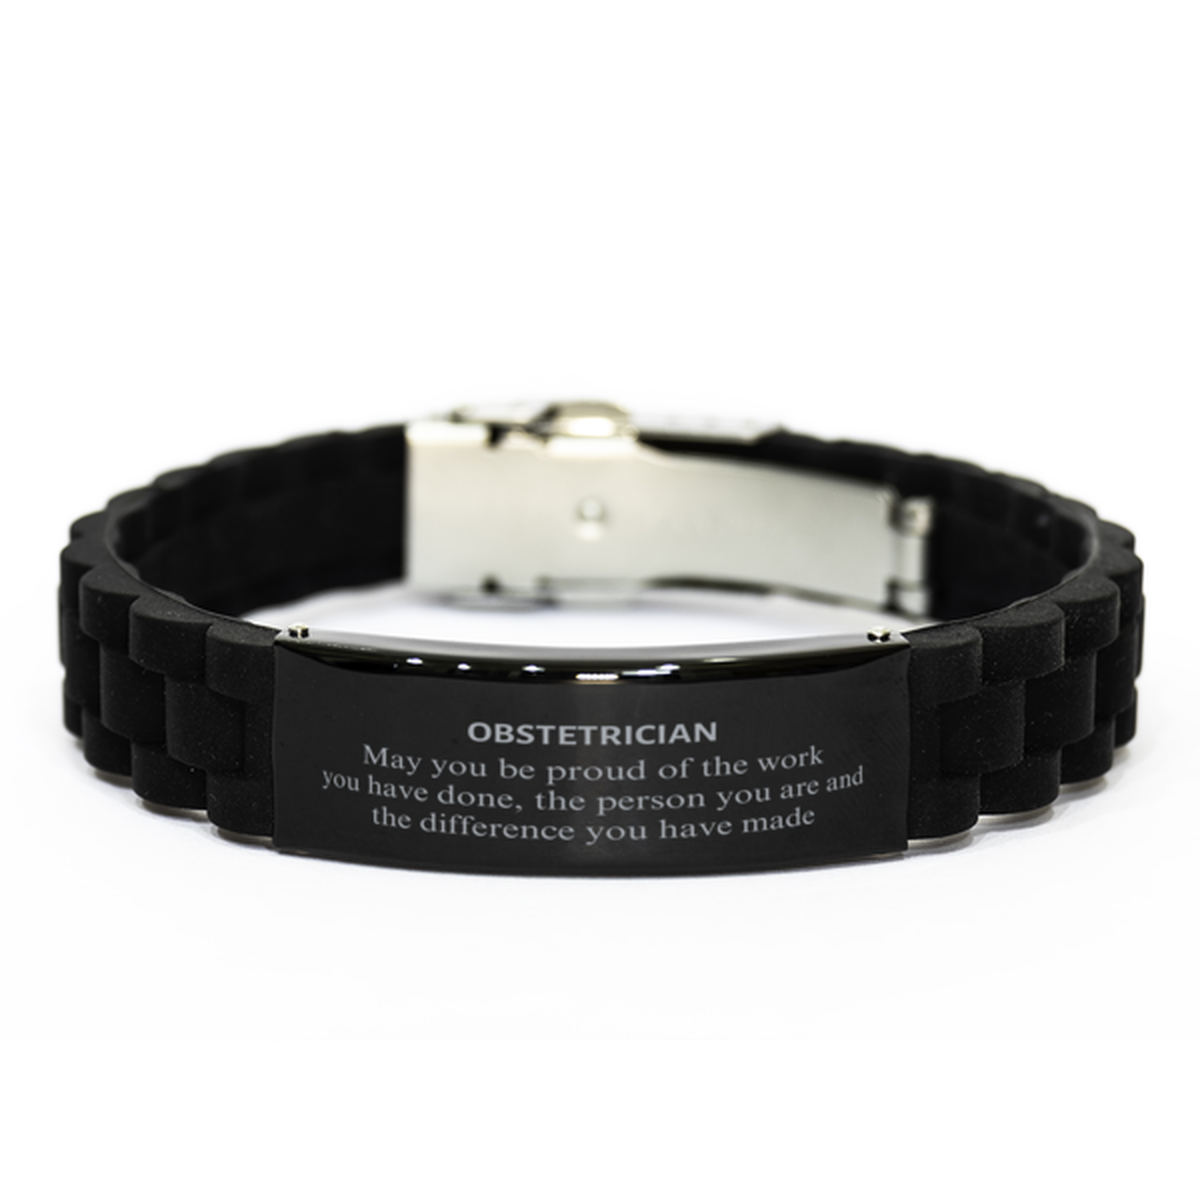 Obstetrician May you be proud of the work you have done, Retirement Obstetrician Black Glidelock Clasp Bracelet for Colleague Appreciation Gifts Amazing for Obstetrician